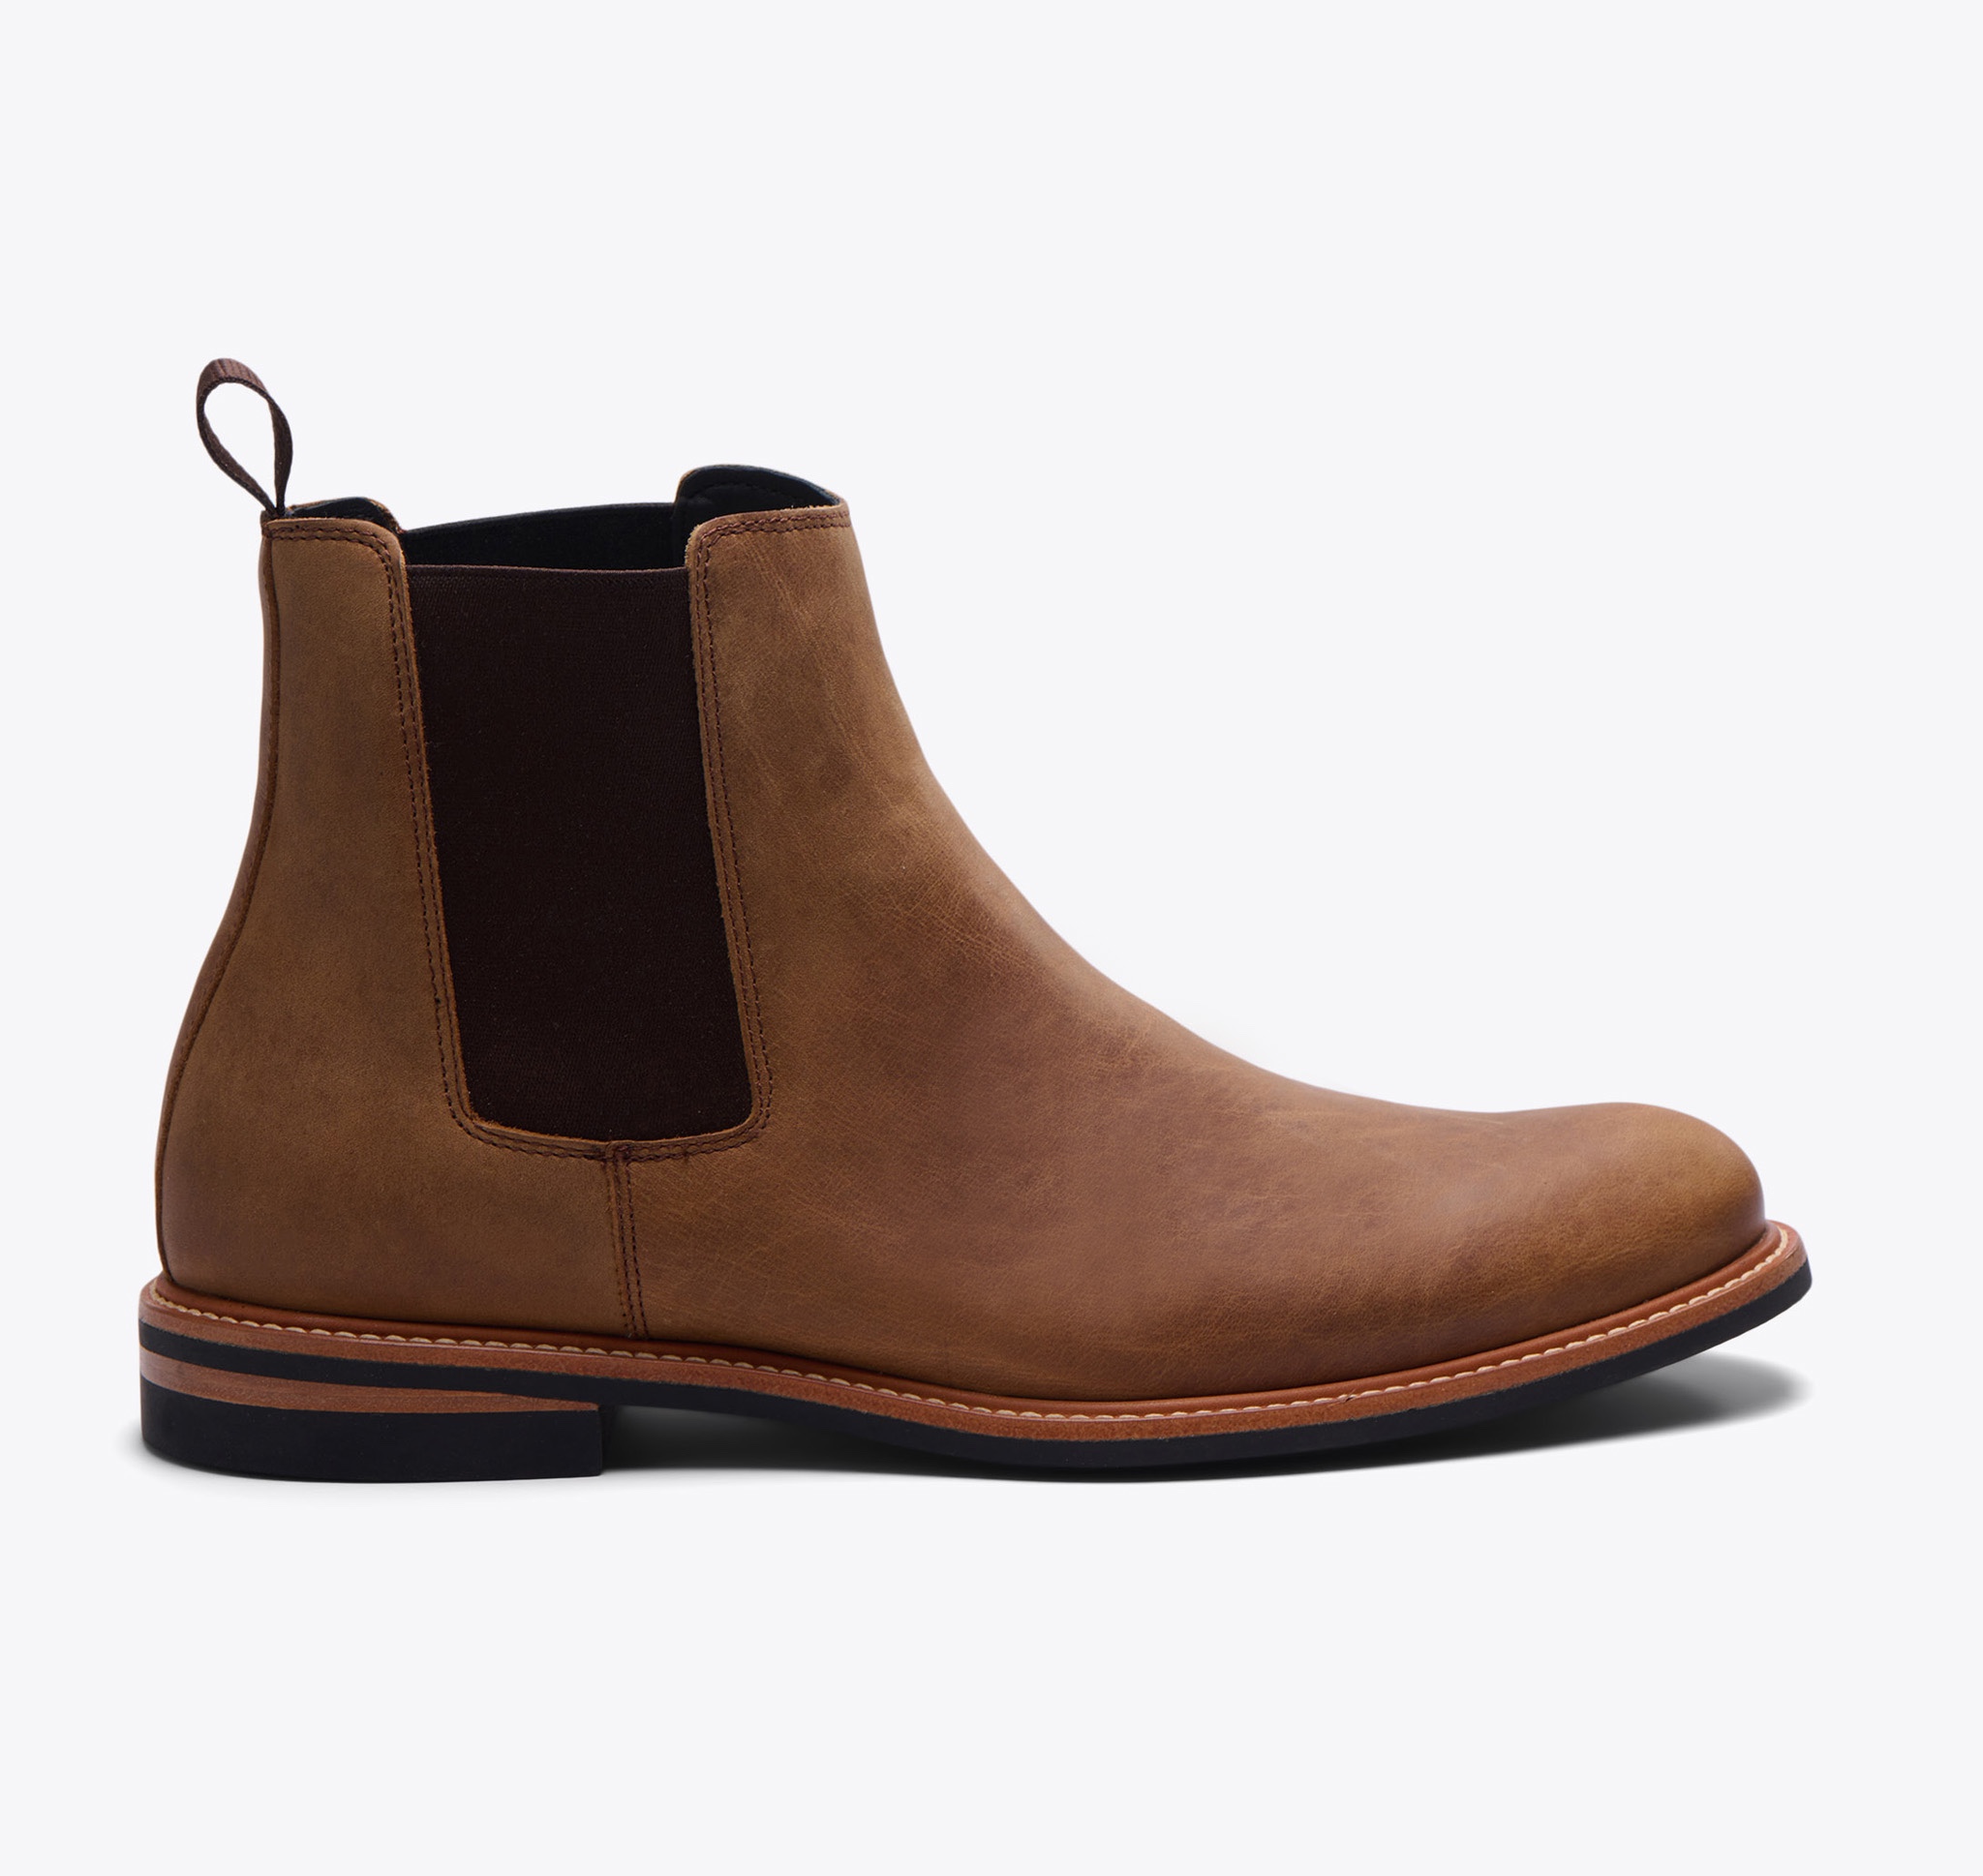 Nisolo All-Weather Chelsea Boot Tobacco - Every Nisolo product is built on the foundation of comfort, function, and design. 